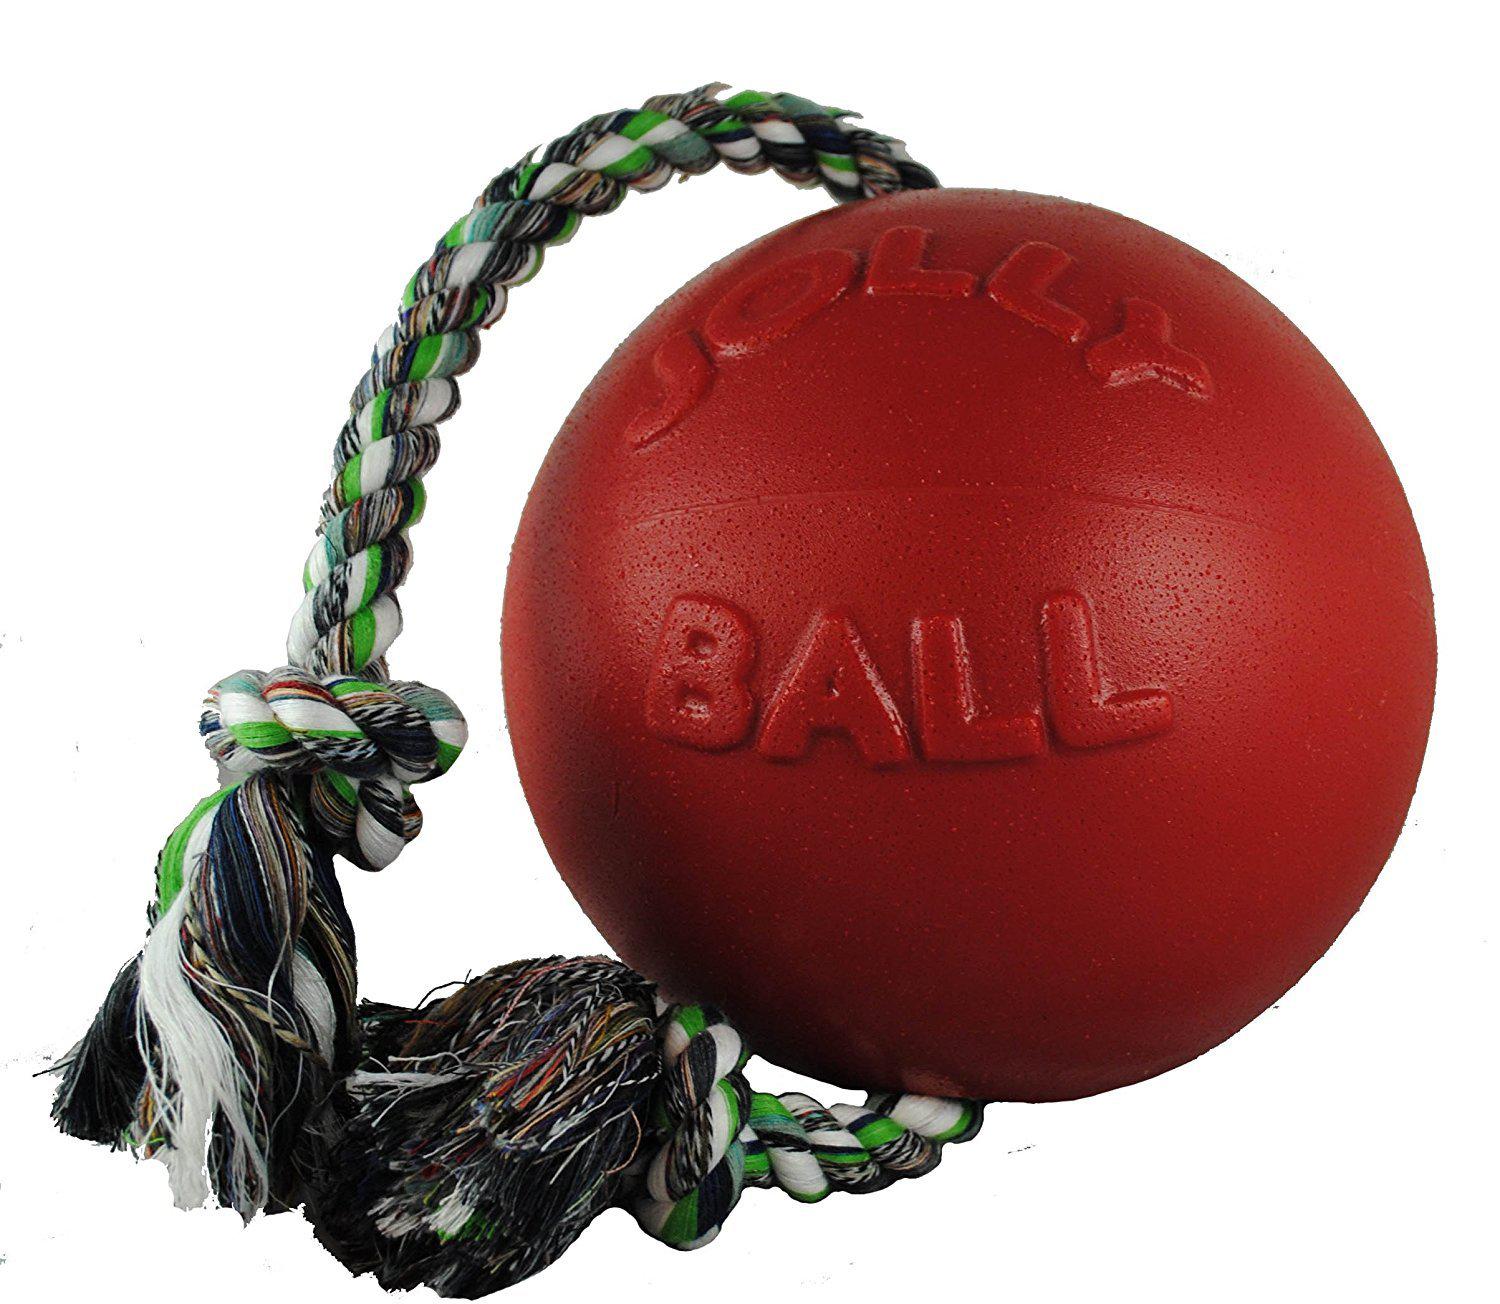 Jolly Pets Romp-N-Roll Tug Rope Ball Dog Toy, size/color varies-Le Pup Pet Supplies and Grooming